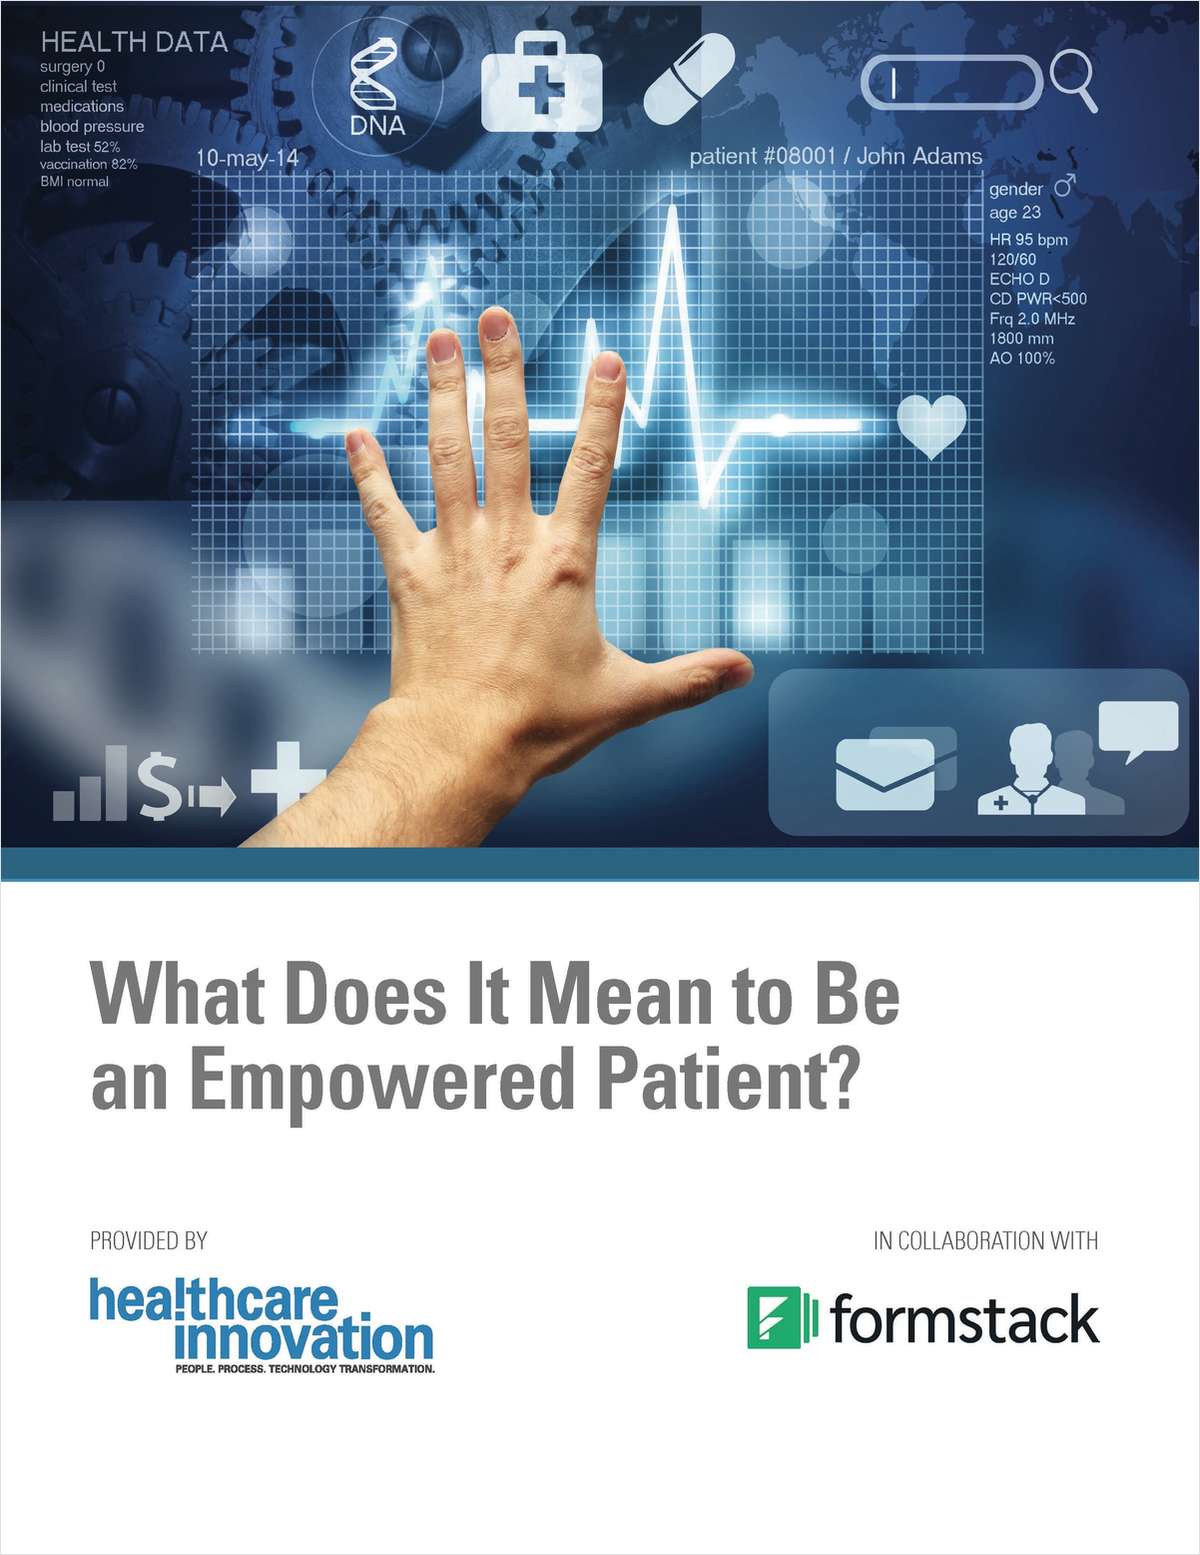 What Does It Mean to Be an Empowered Patient?